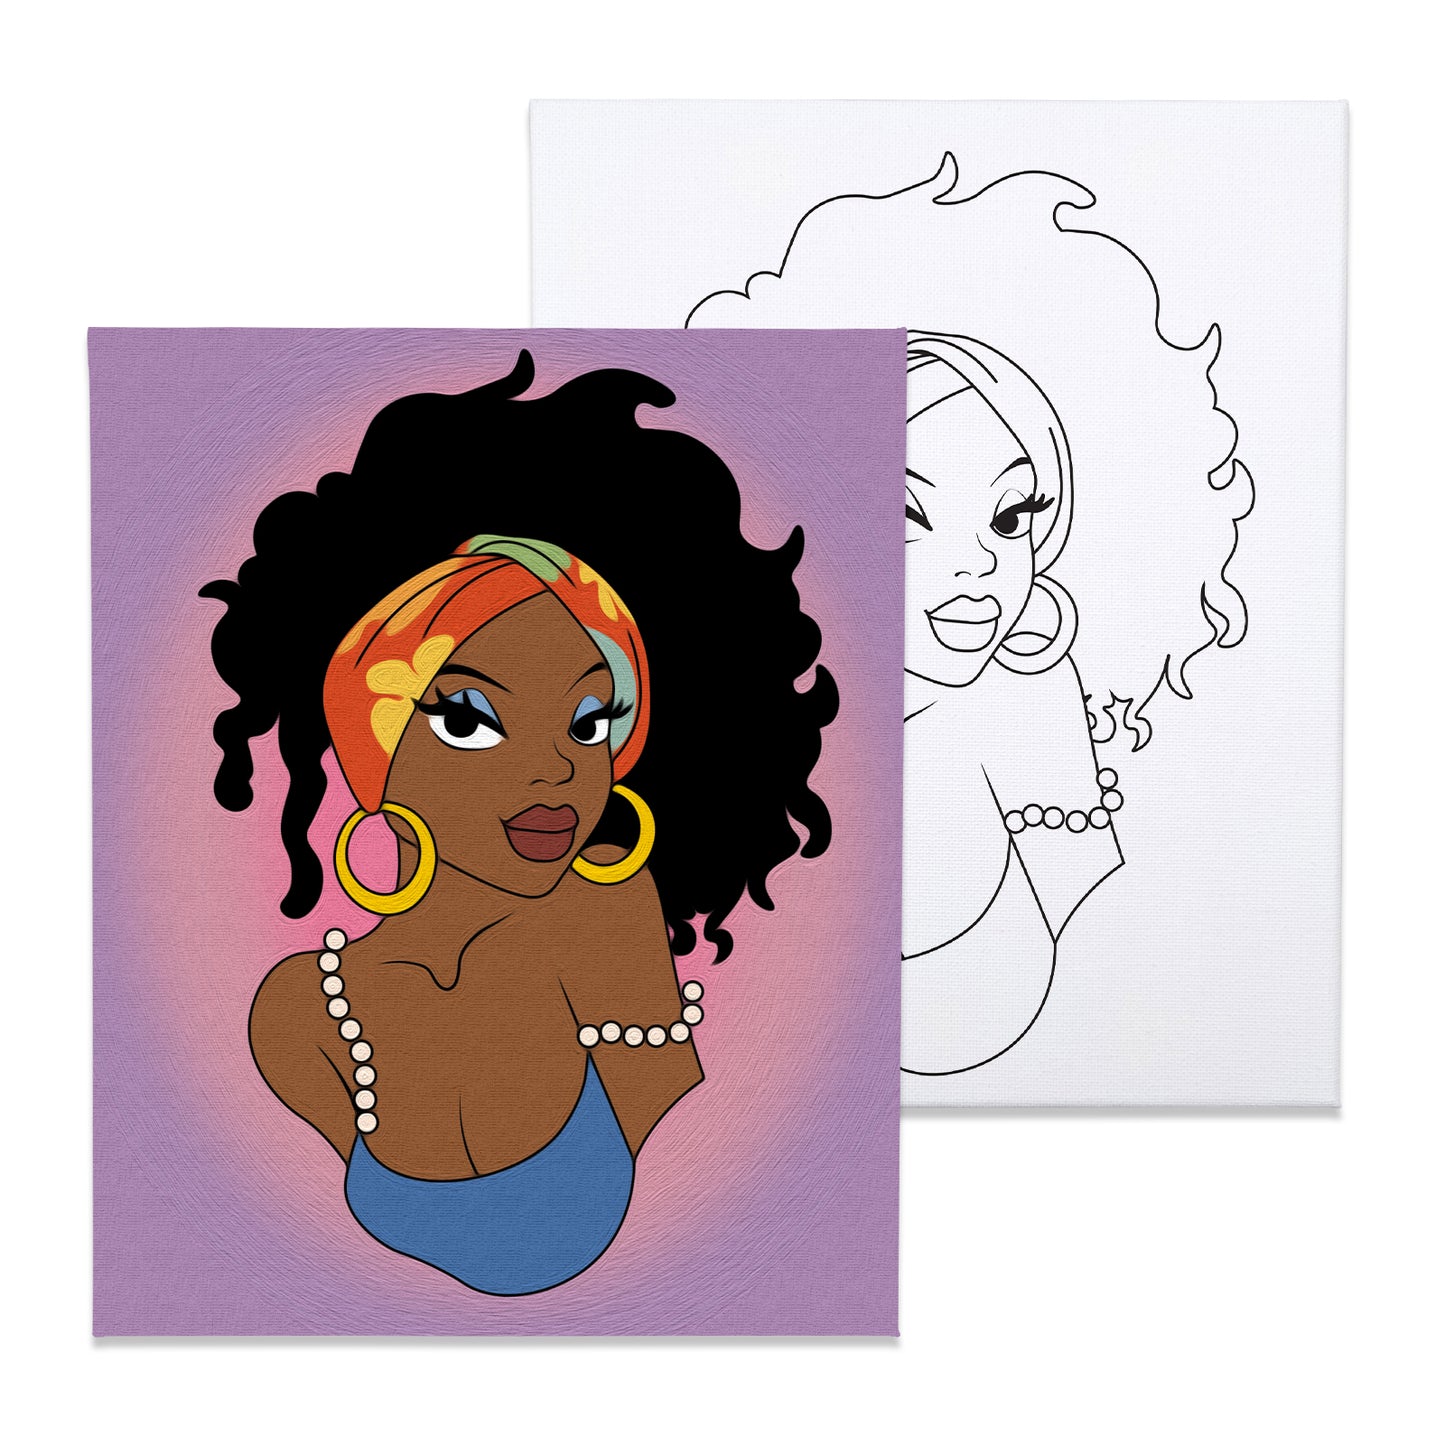 Paint & Sip DIY Party Kit/ Pre Drawn/canvas/adult Painting/ at Home Kit,  Gift for Her Black Woman Afro Goddess Gold Dress 8 X 10 